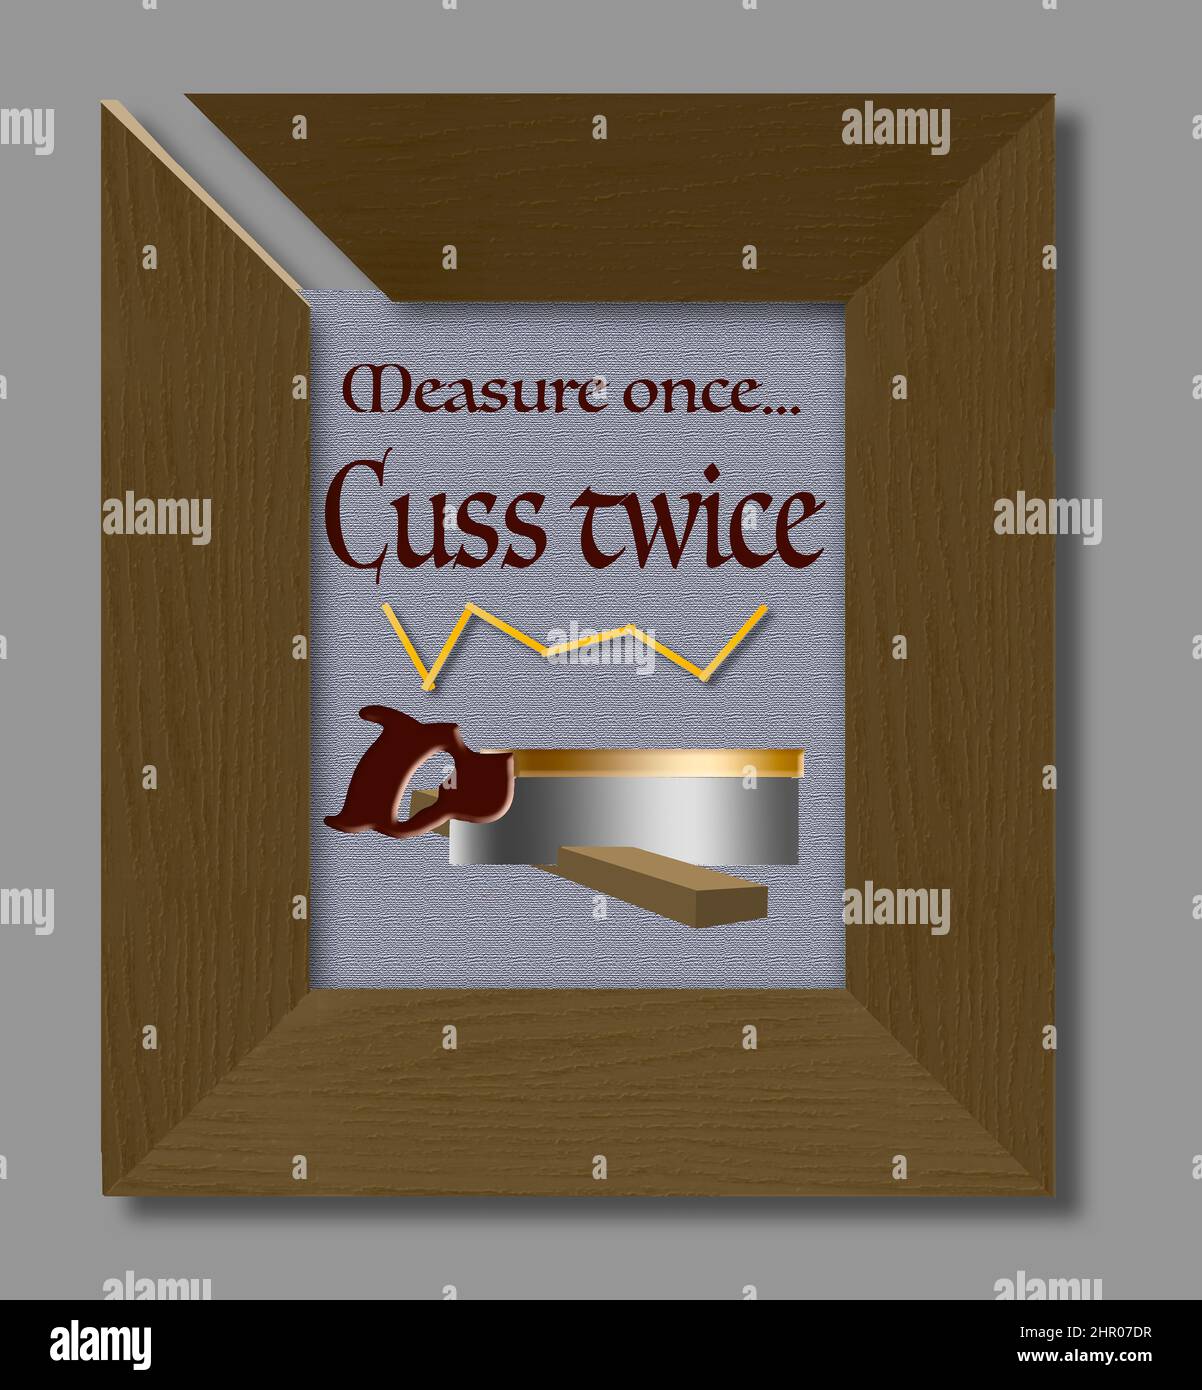 https://c8.alamy.com/comp/2HR07DR/a-woodworkers-adage-measure-twice-cut-once-has-been-changed-to-measure-once-cuss-twice-this-humorous-3-d-illustration-includes-a-frame-that-was-2HR07DR.jpg